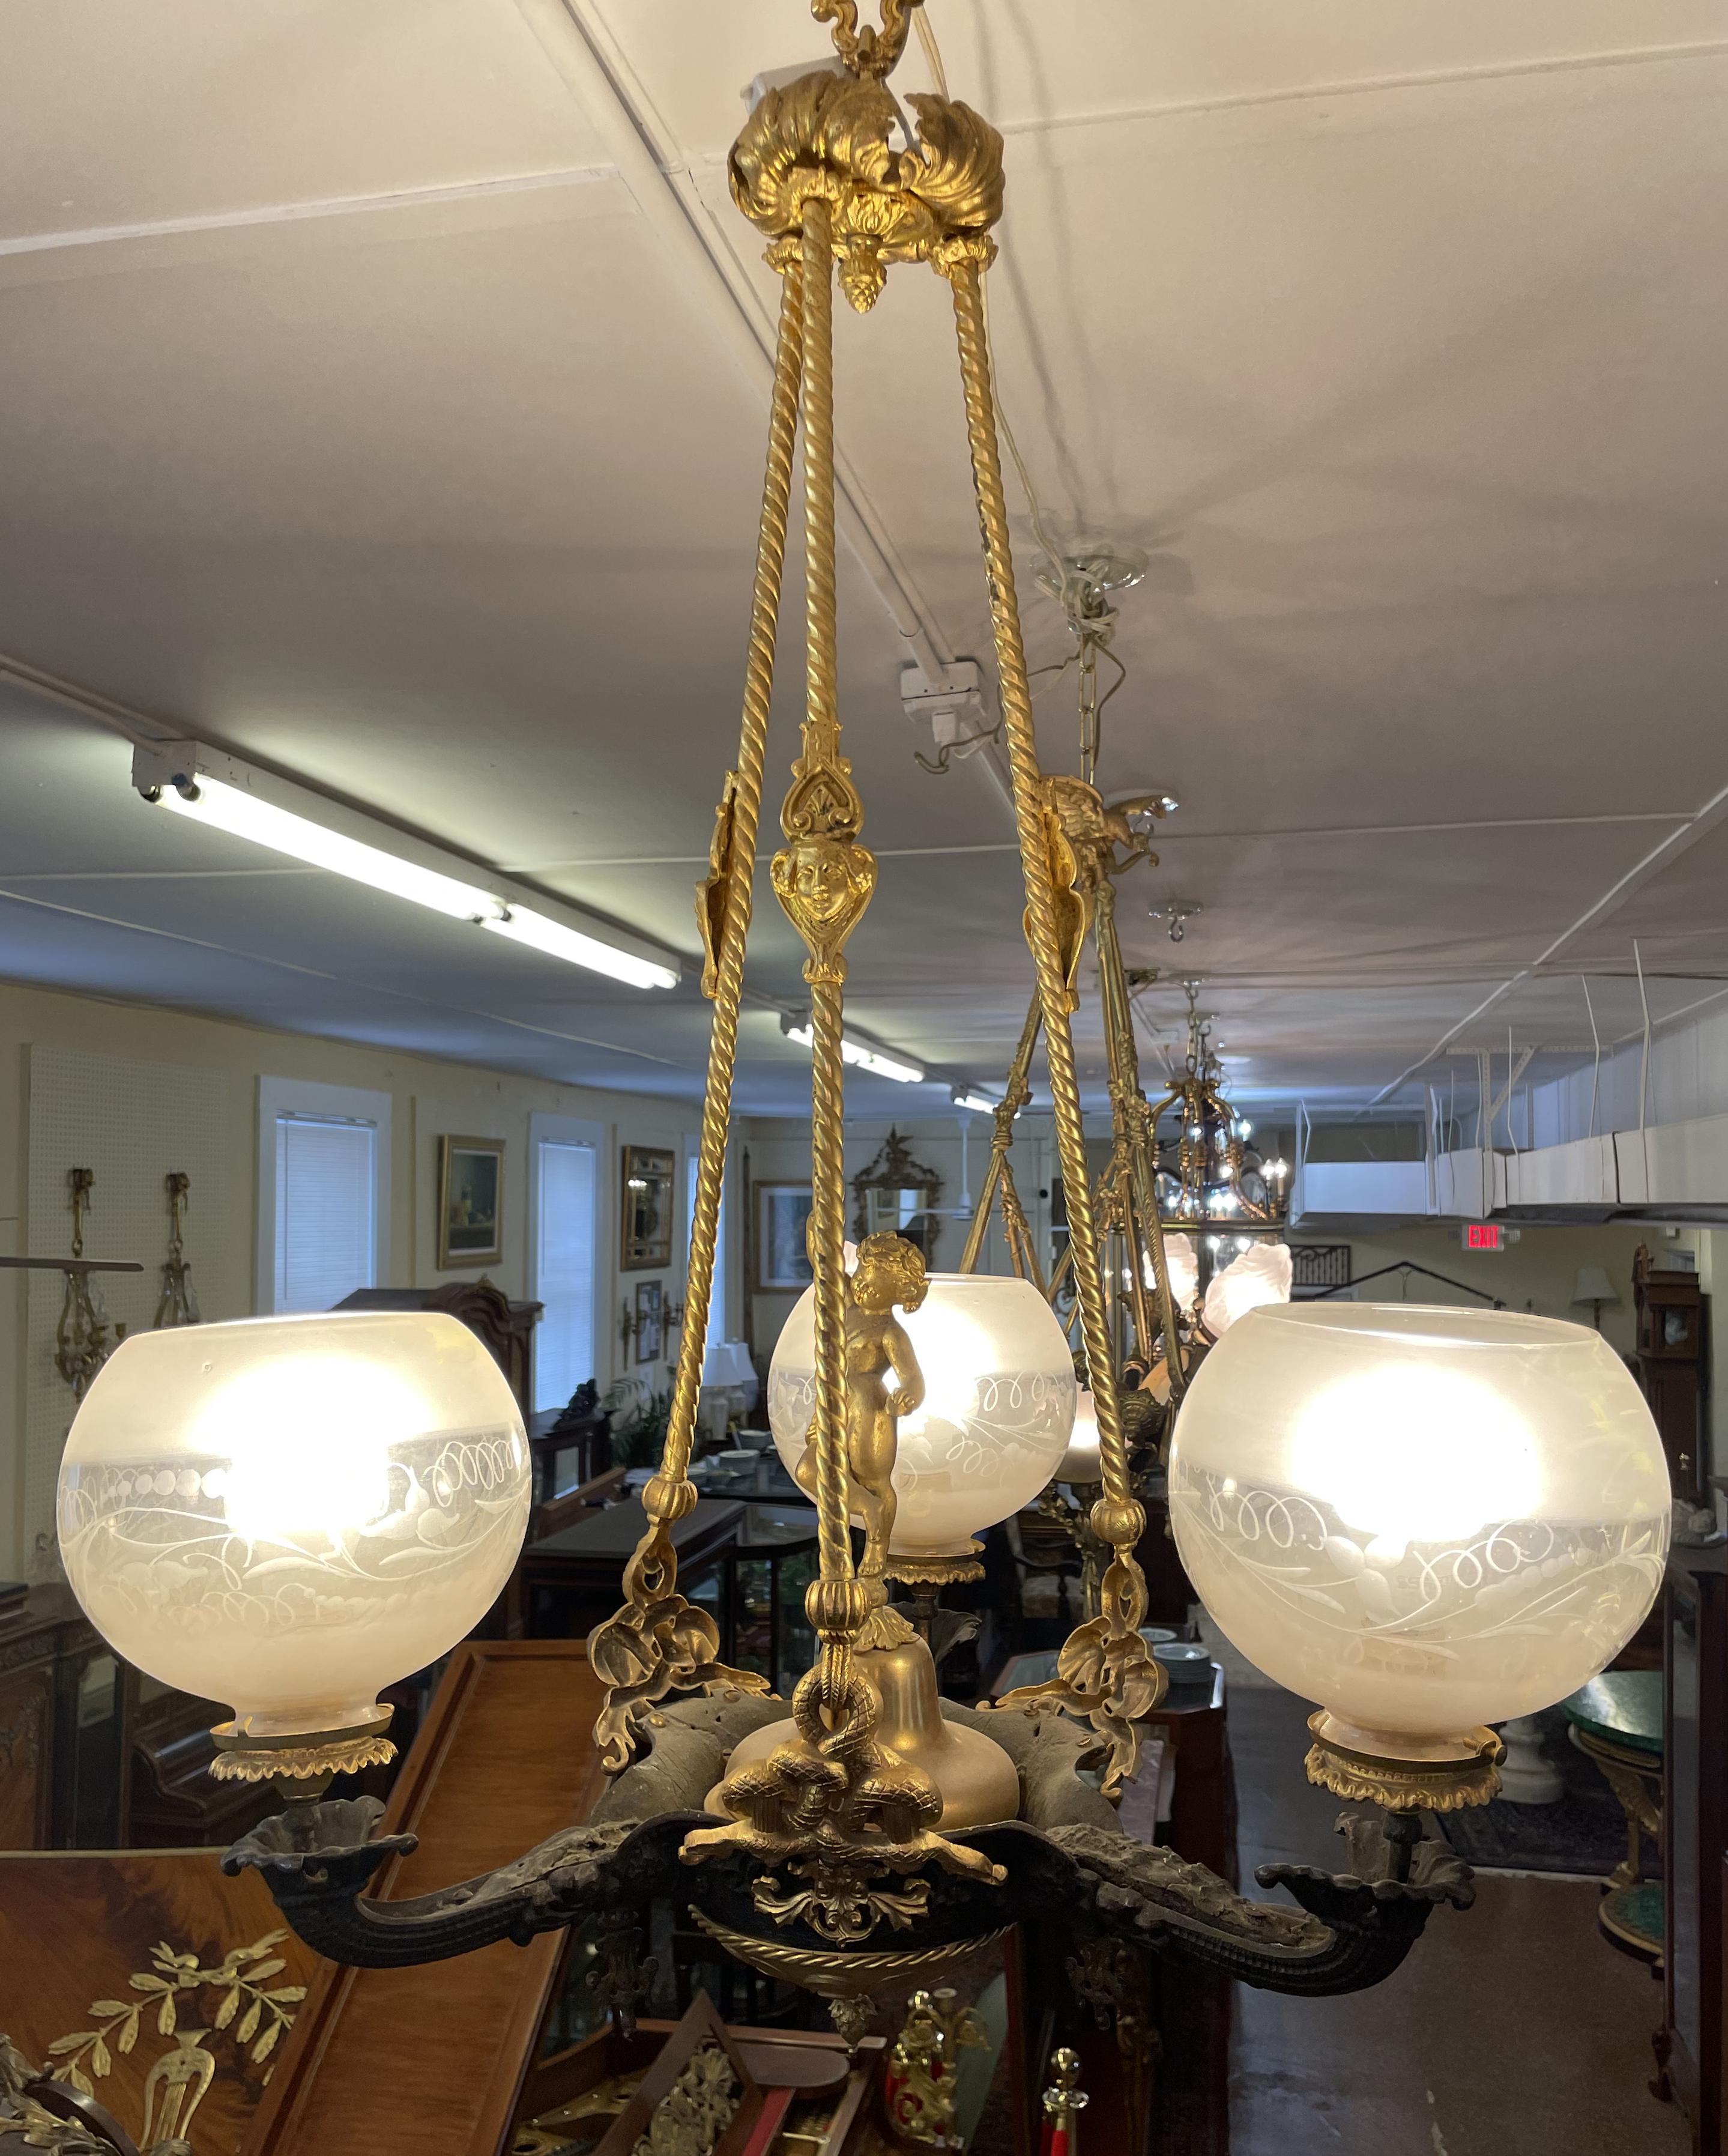 ​19th Century Figural Gasoliier Chandelier Attributed to Cornelius & Baker

Dimensions : 32.5